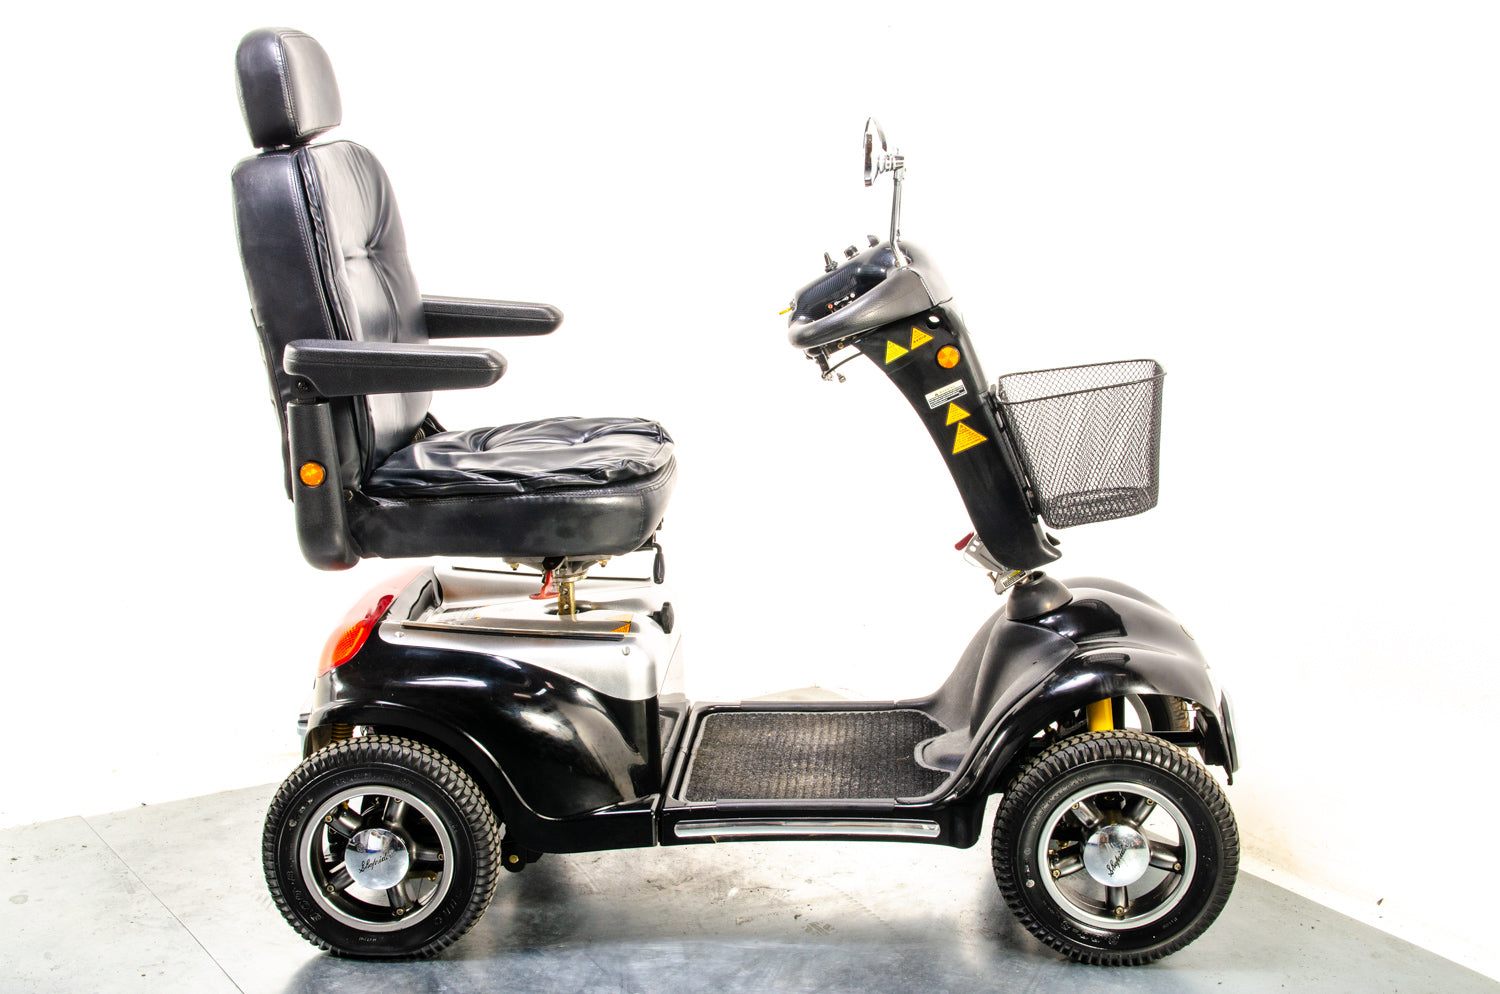 Shoprider Cordoba Used Mobility Scooter Off-Road Large All-Terrain 8mph Roma Black 03542